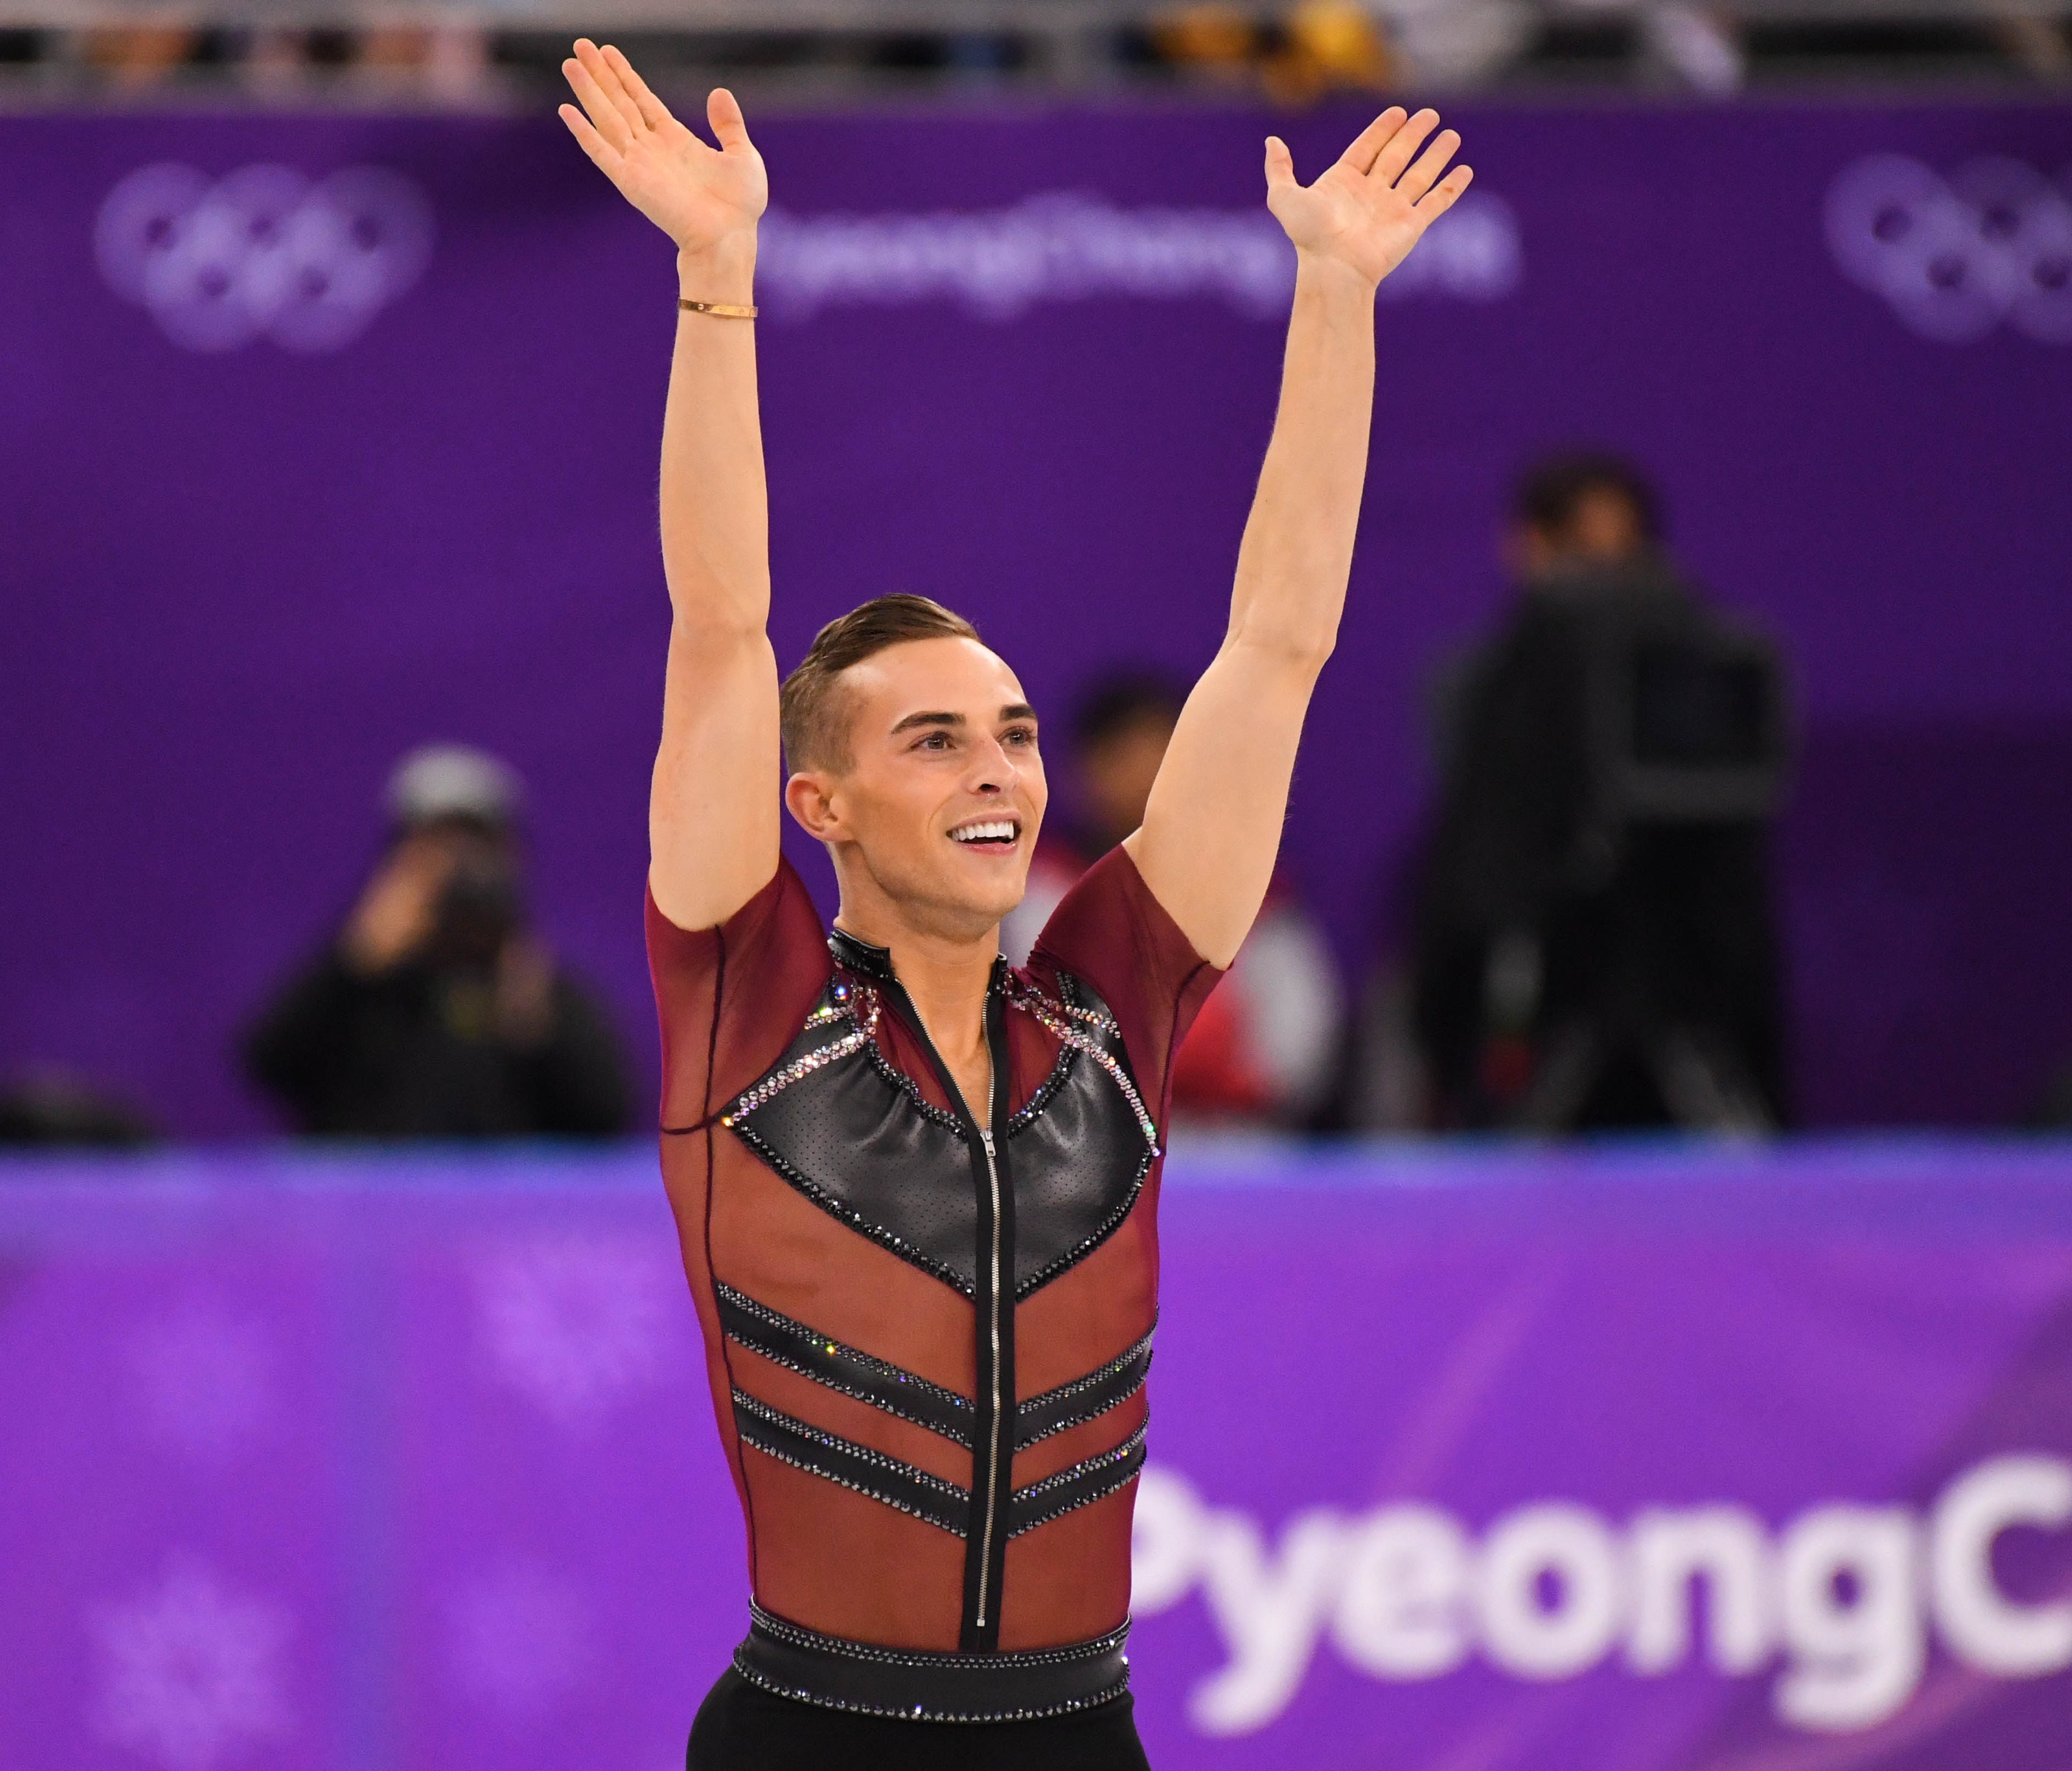 Adam Rippon competes in the men's figure skating short program during the Pyeongchang 2018 Olympic Winter Games at Gangneung Ice Arena on Feb. 16.